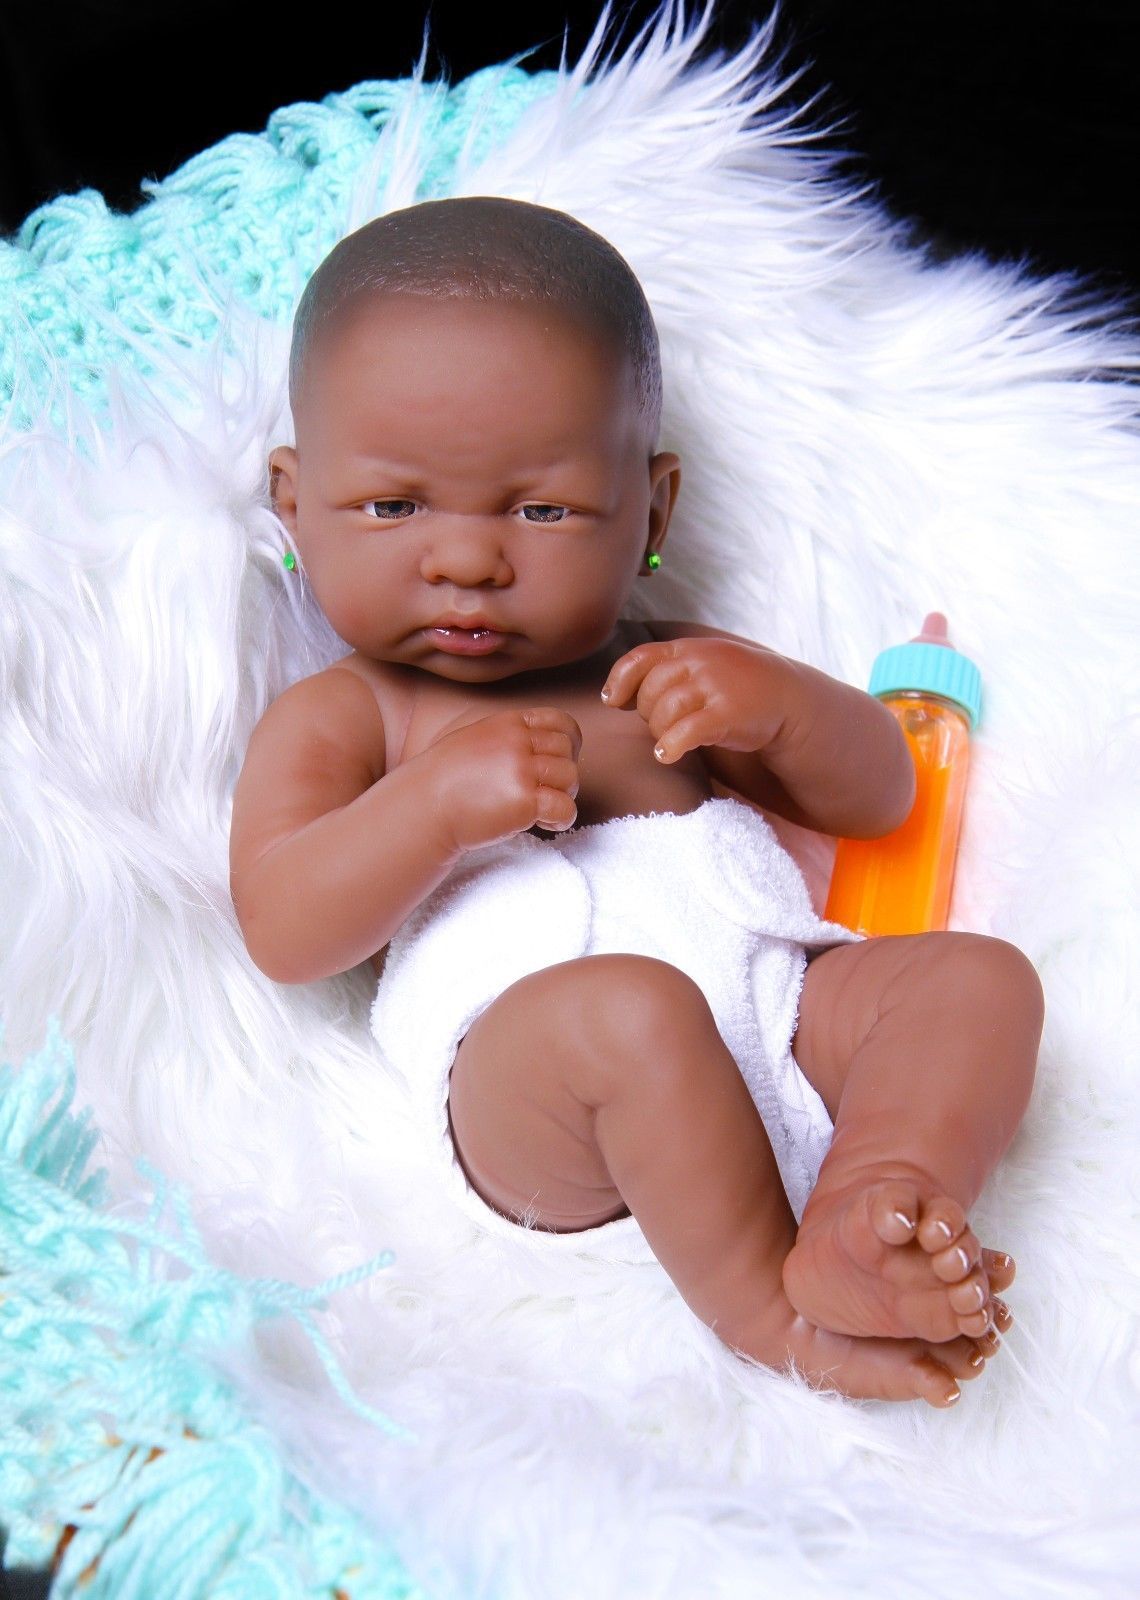 black baby doll made in china